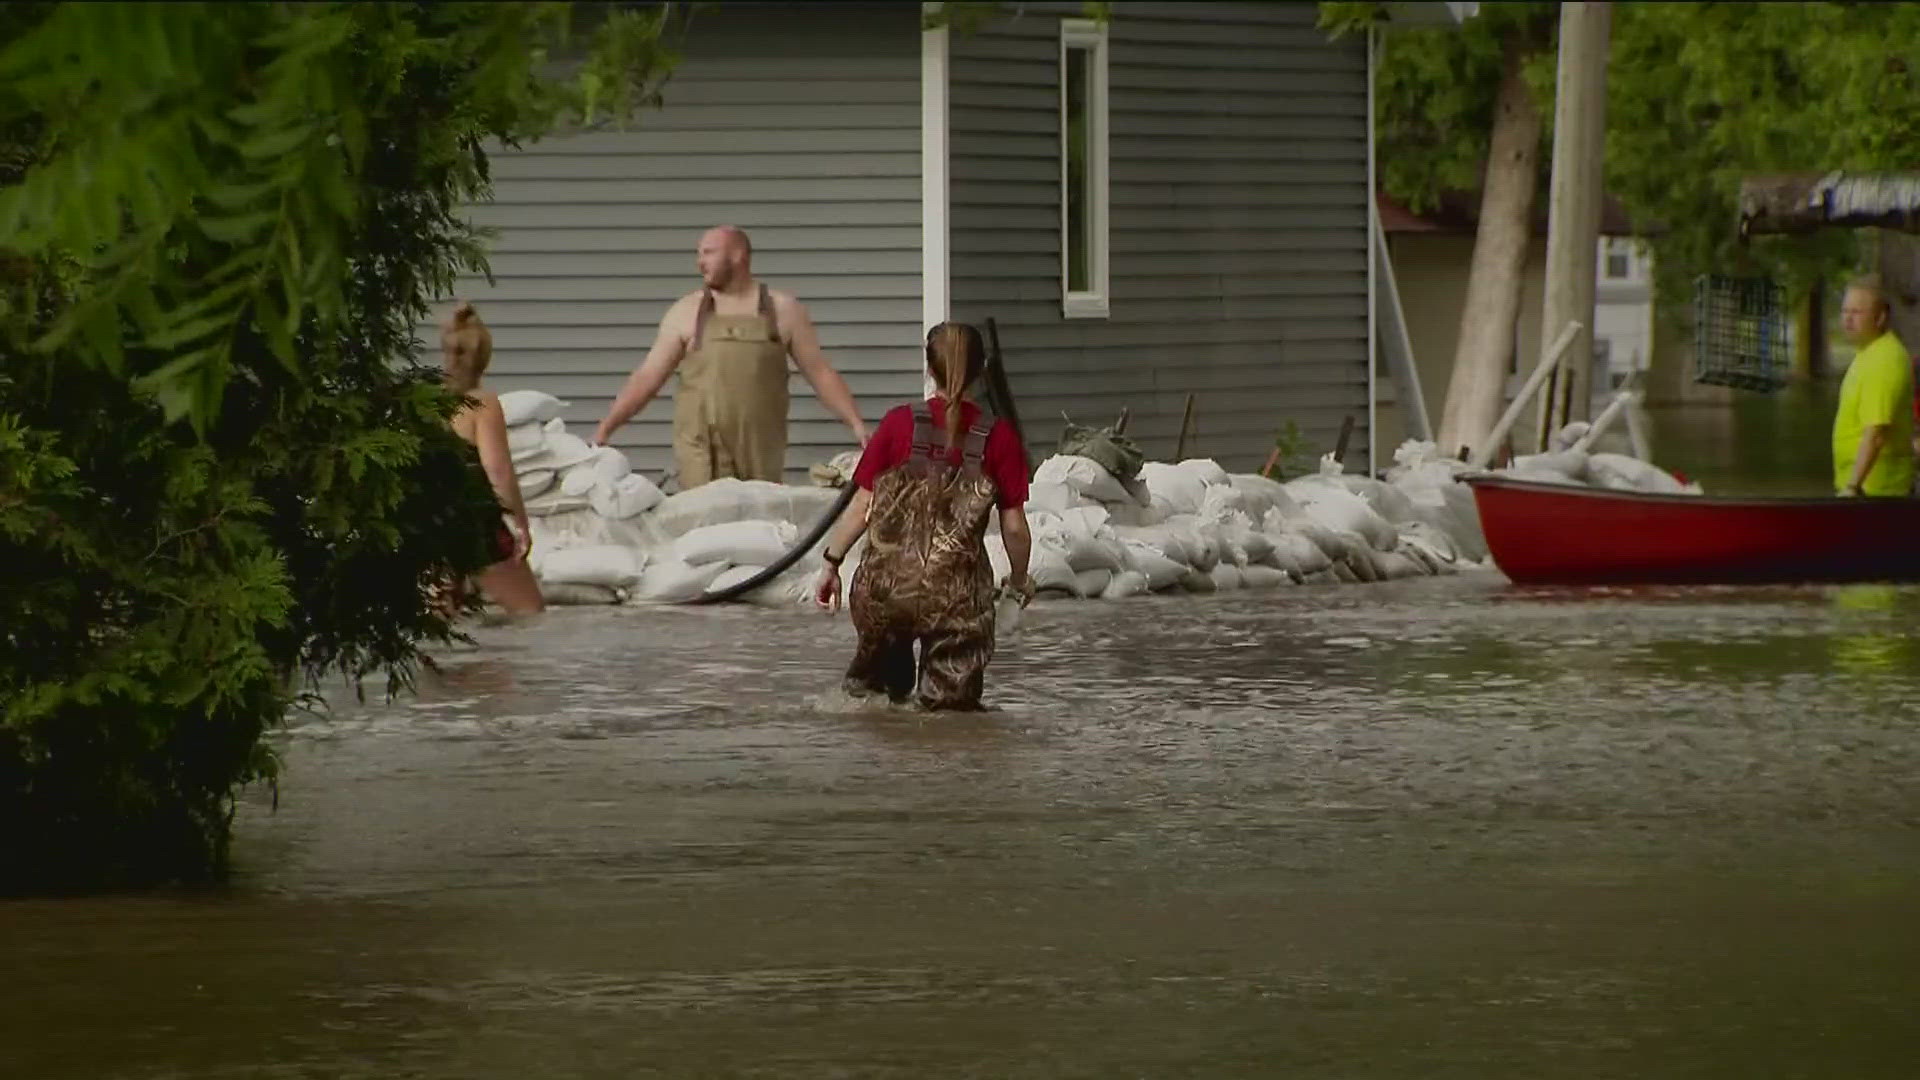 Floodwaters have swamped the city's main street and scores of homes and vacation properties.